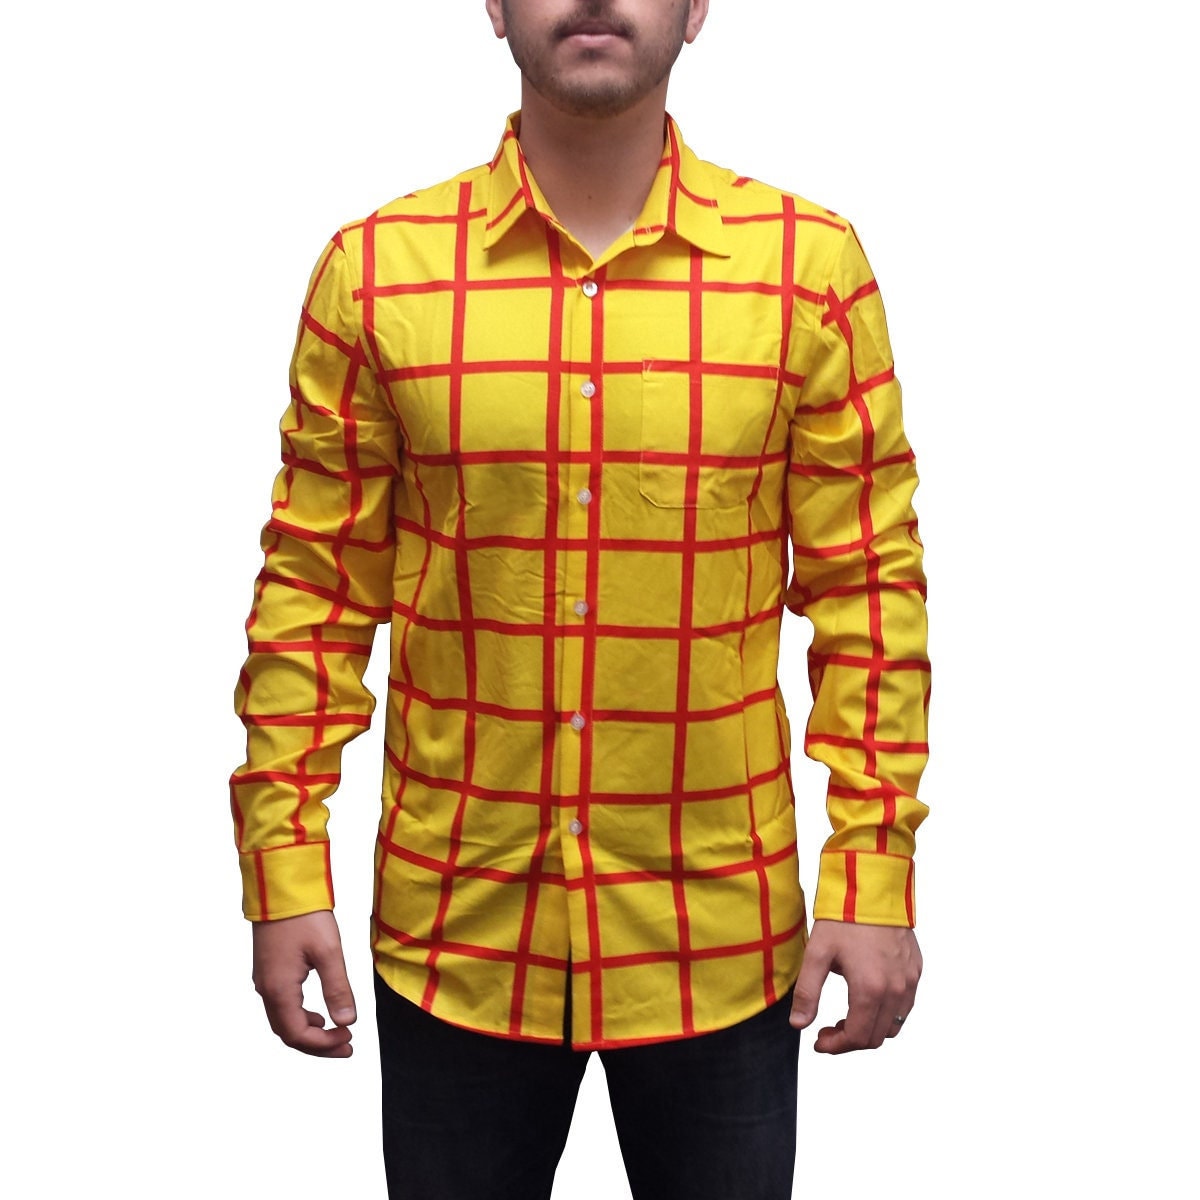 Sheriff Woody Shirt Adult Costume Movie Cosplay Cowboy Striped Button Down Up Halloween Fancy Dress Long Sleeve Gift High Quality